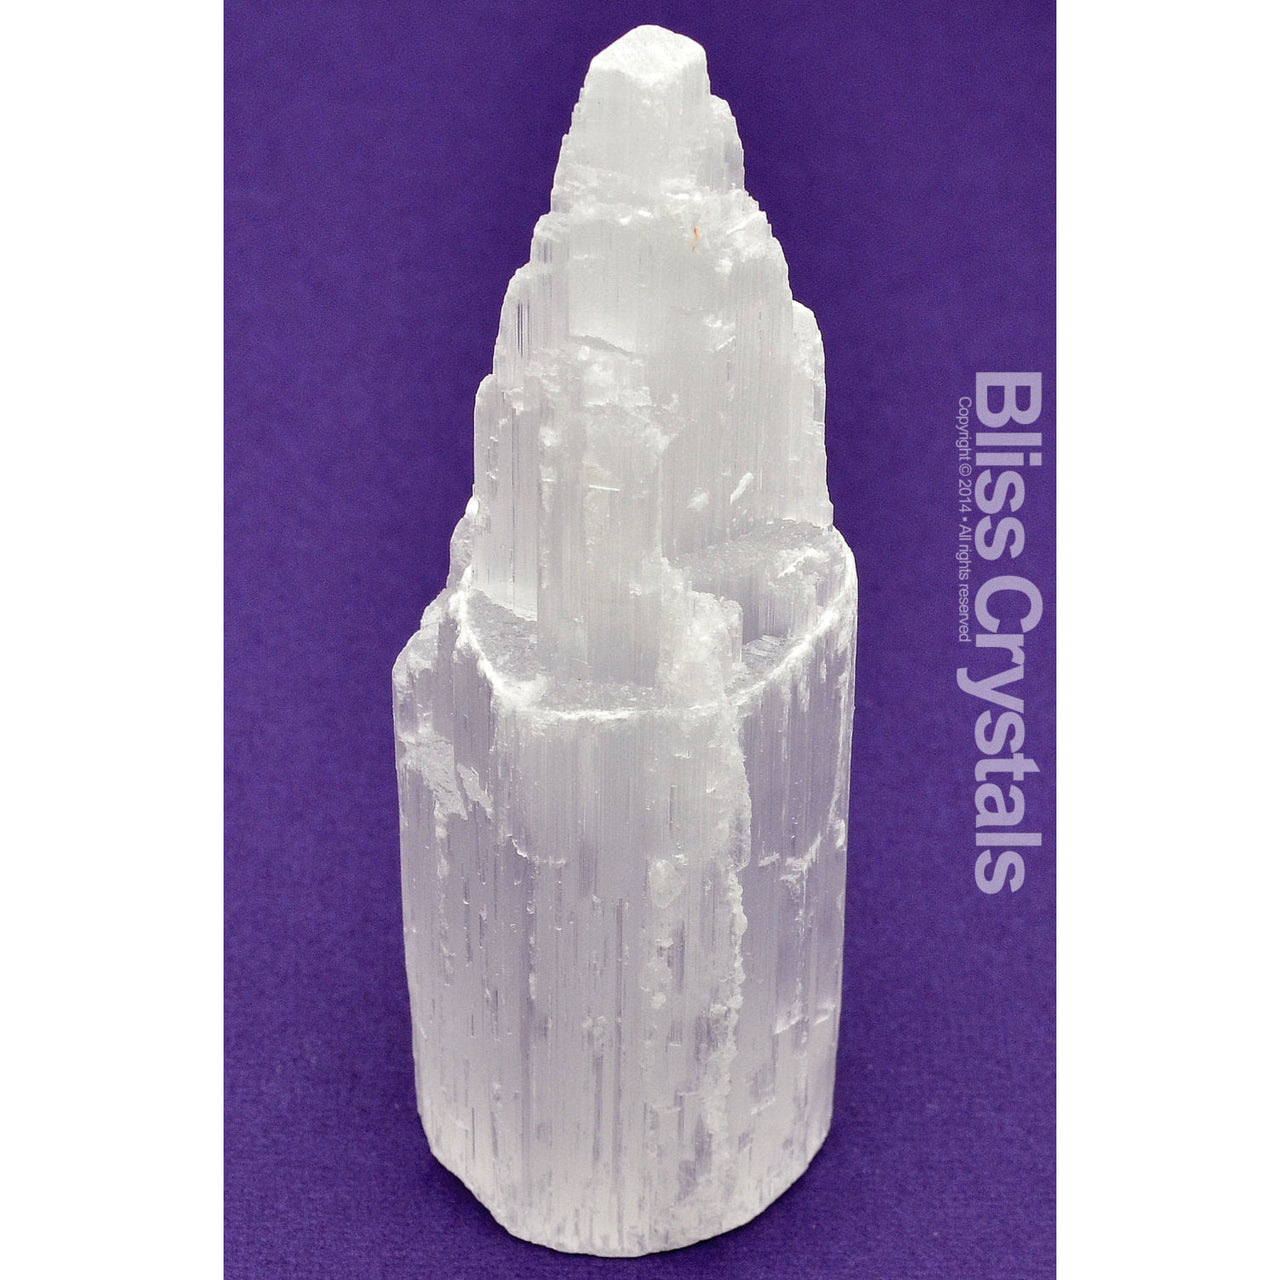 Close-up of SELENITE Skyscraper Tower 4’ Rough White Stone Crystal against a purple background